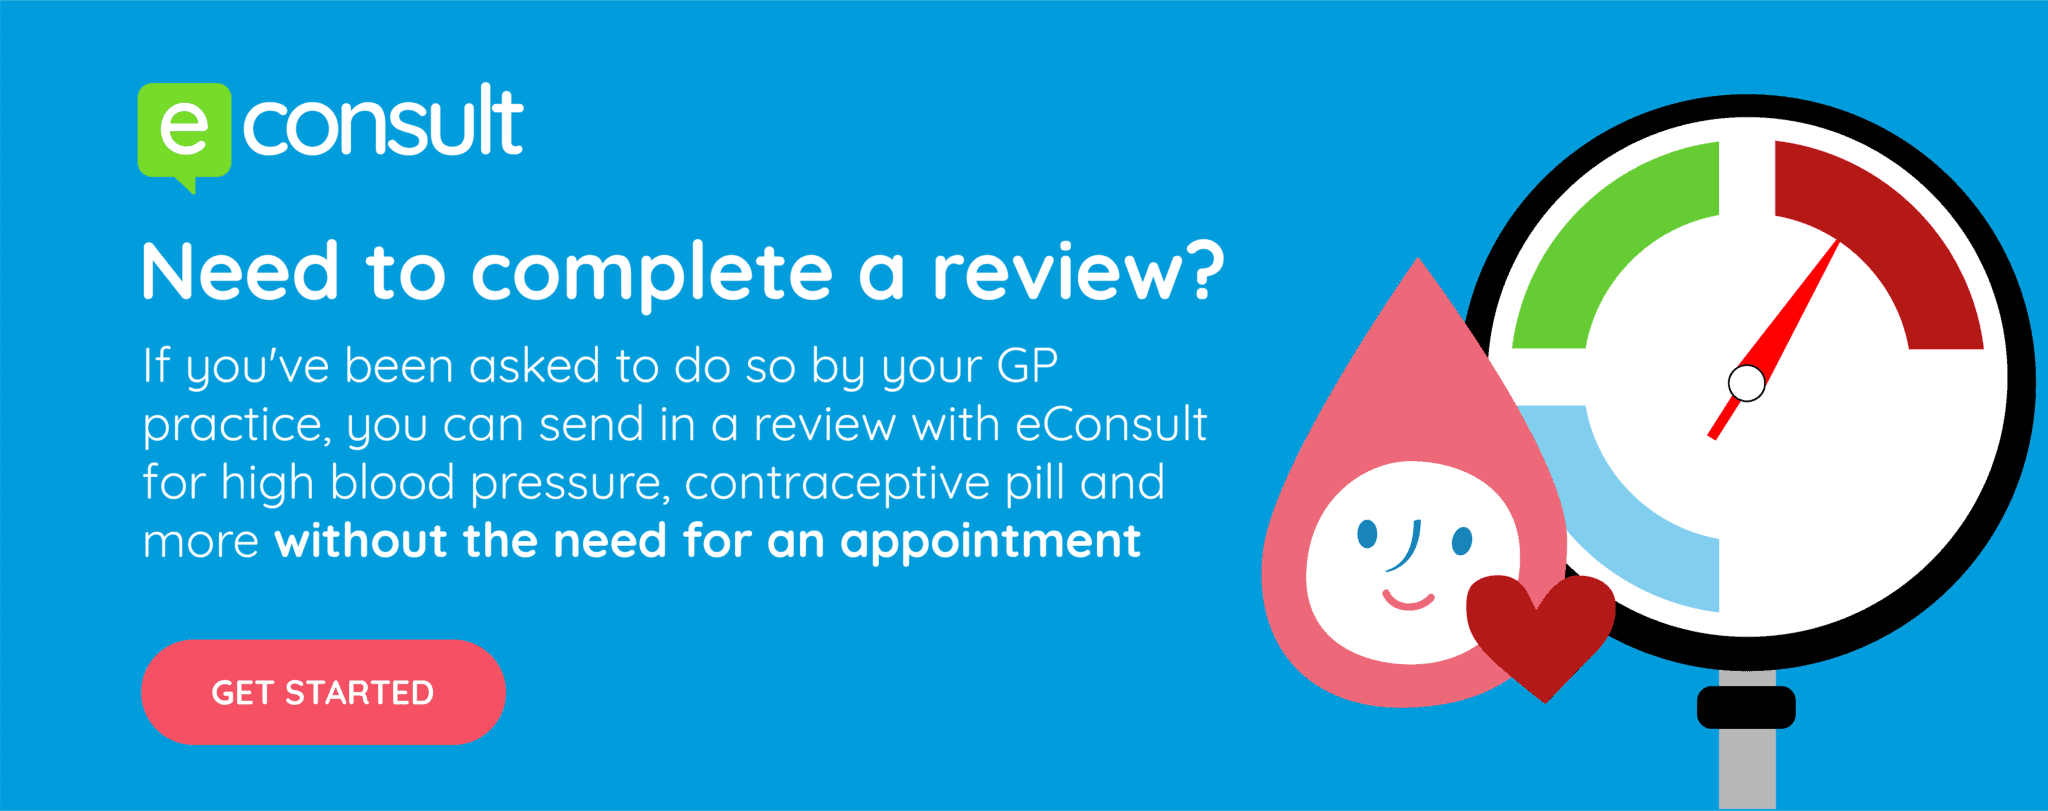 Need to complete a review form?